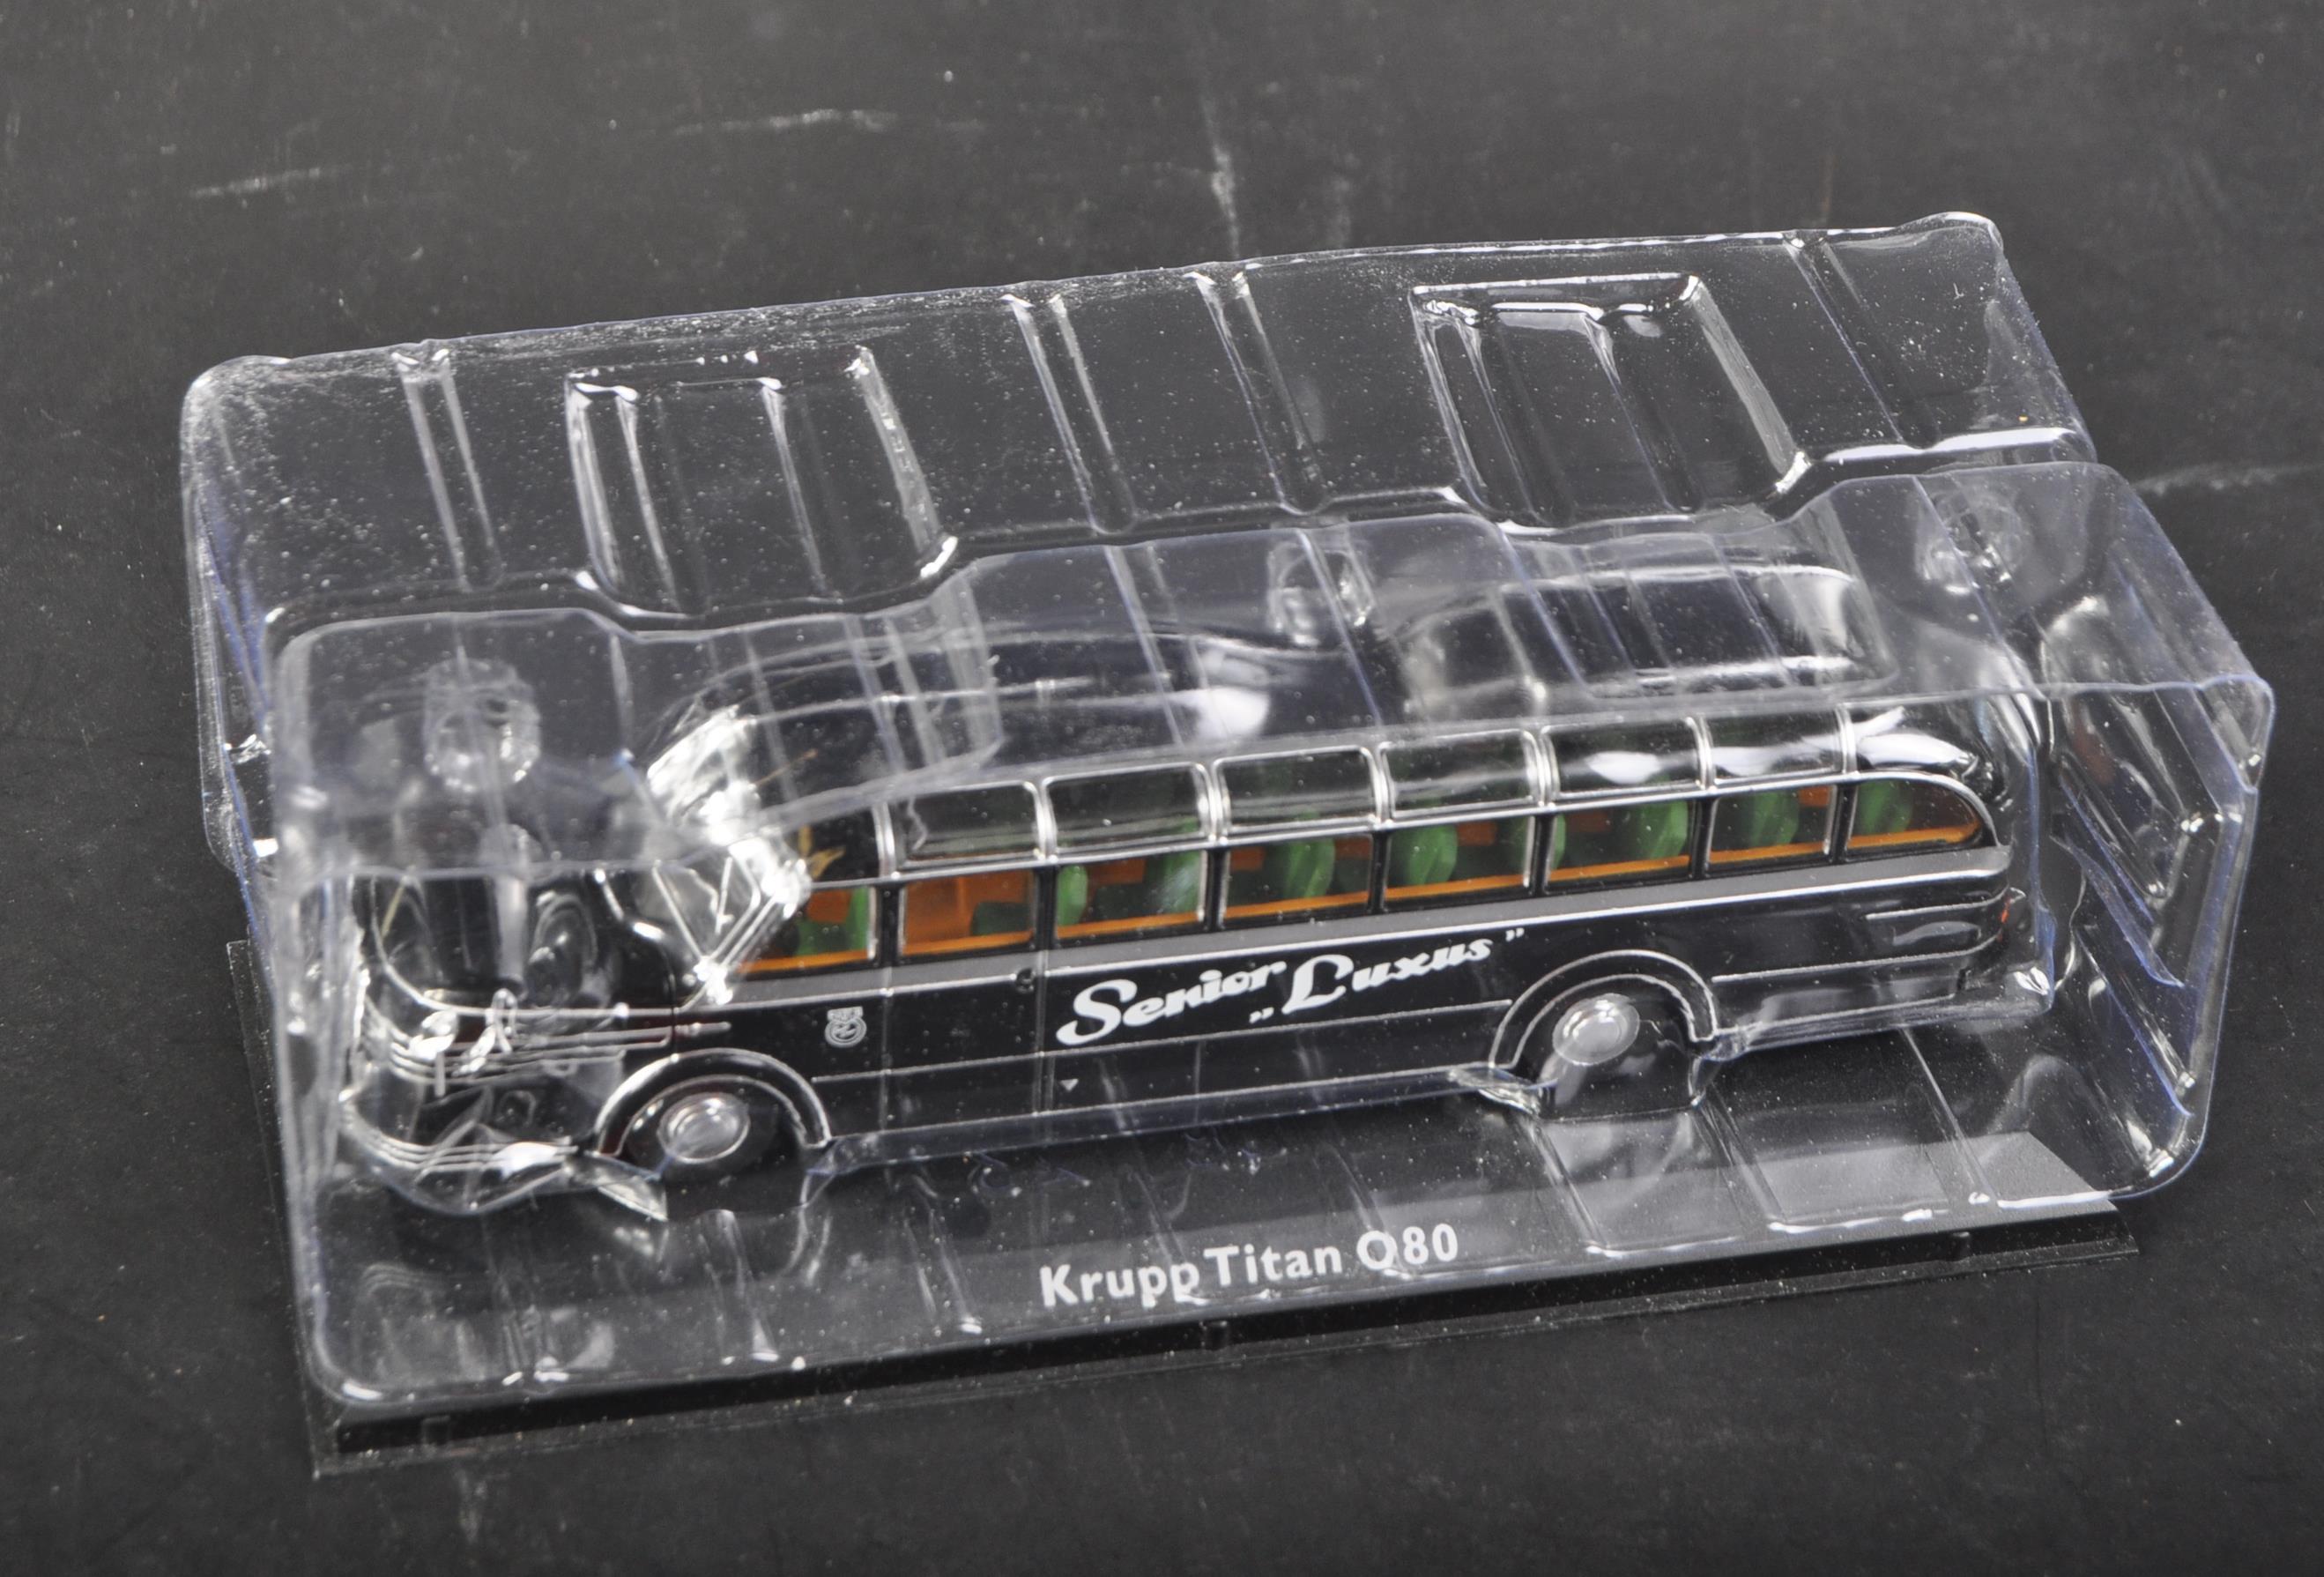 COLLECTION OF ATLAS EDITION CLASSIC COACHES DIECAST MODELS - Image 2 of 3